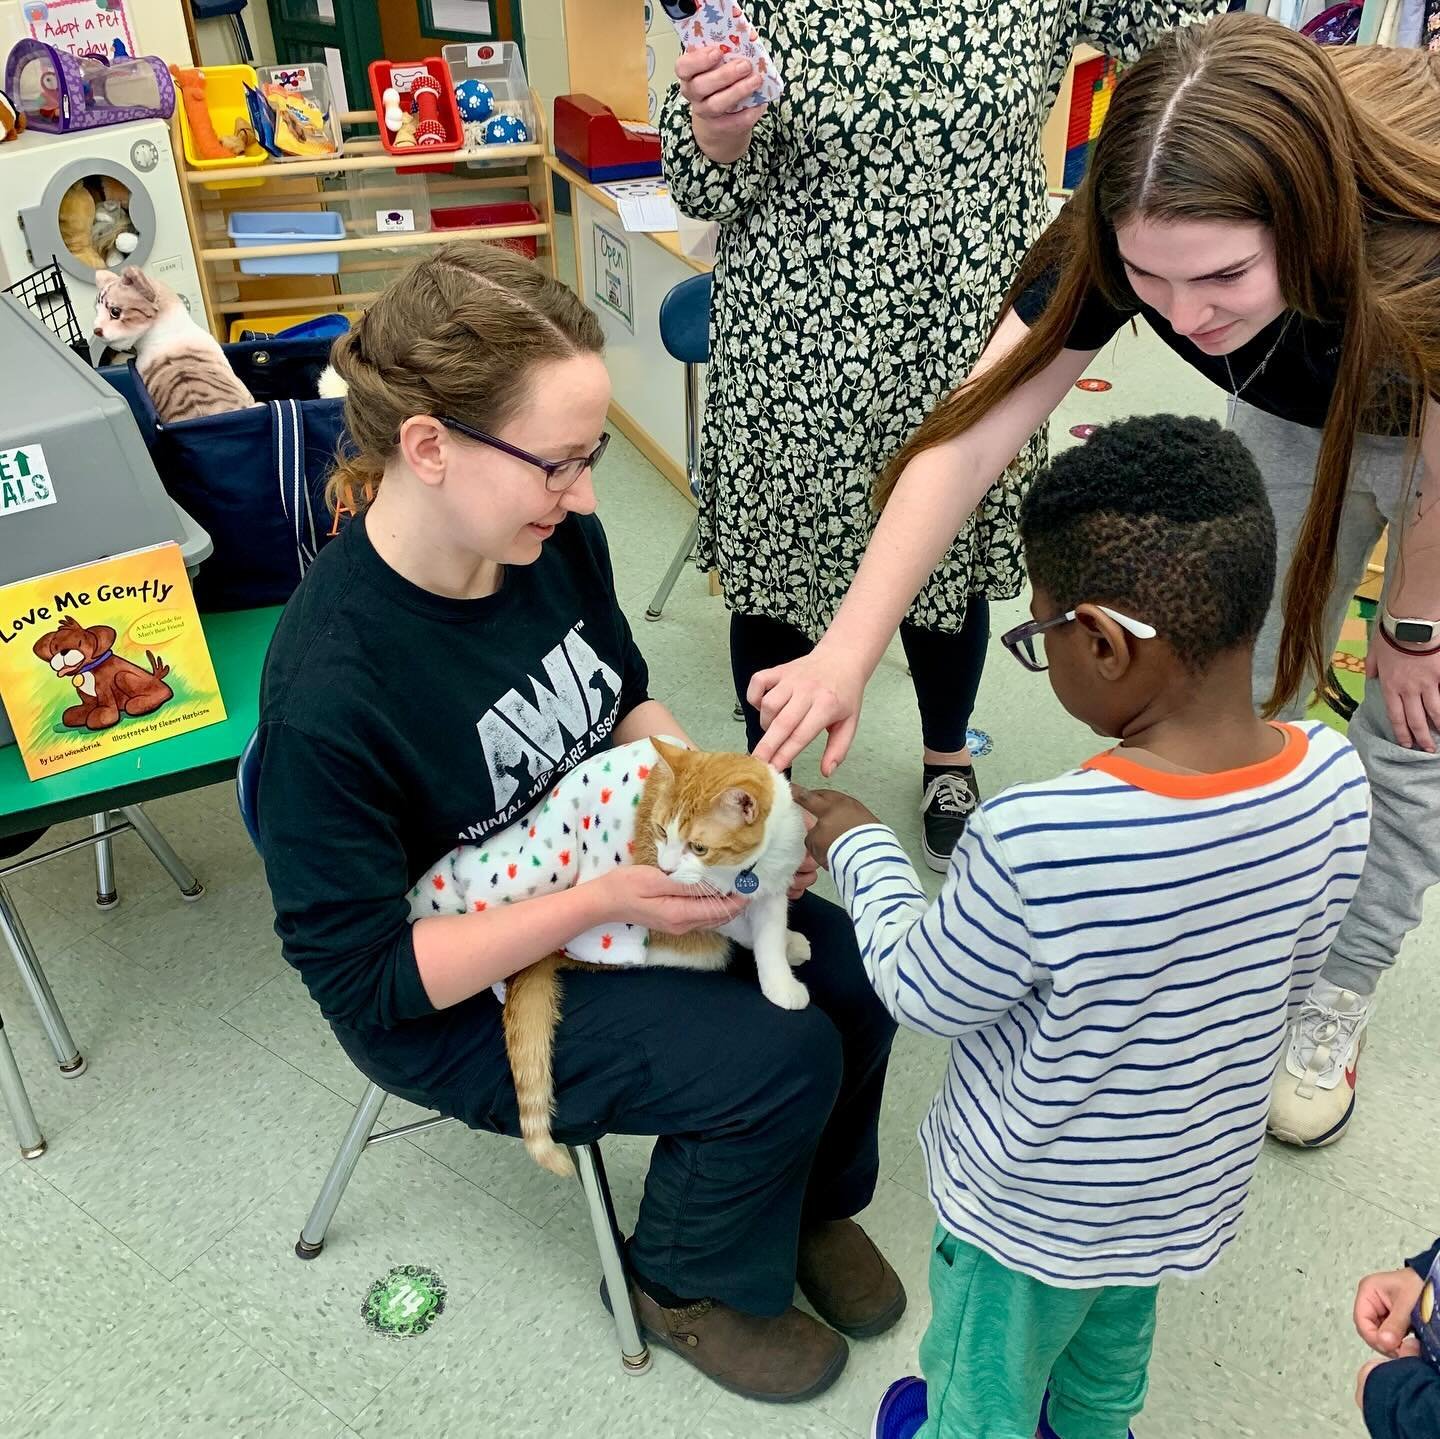 It&rsquo;s often a misconception that children &ldquo;just know&rdquo; how to be gentle with animals but that&rsquo;s not always true. Humane education brought to elementary classrooms is so important and these photos are great examples of how childr